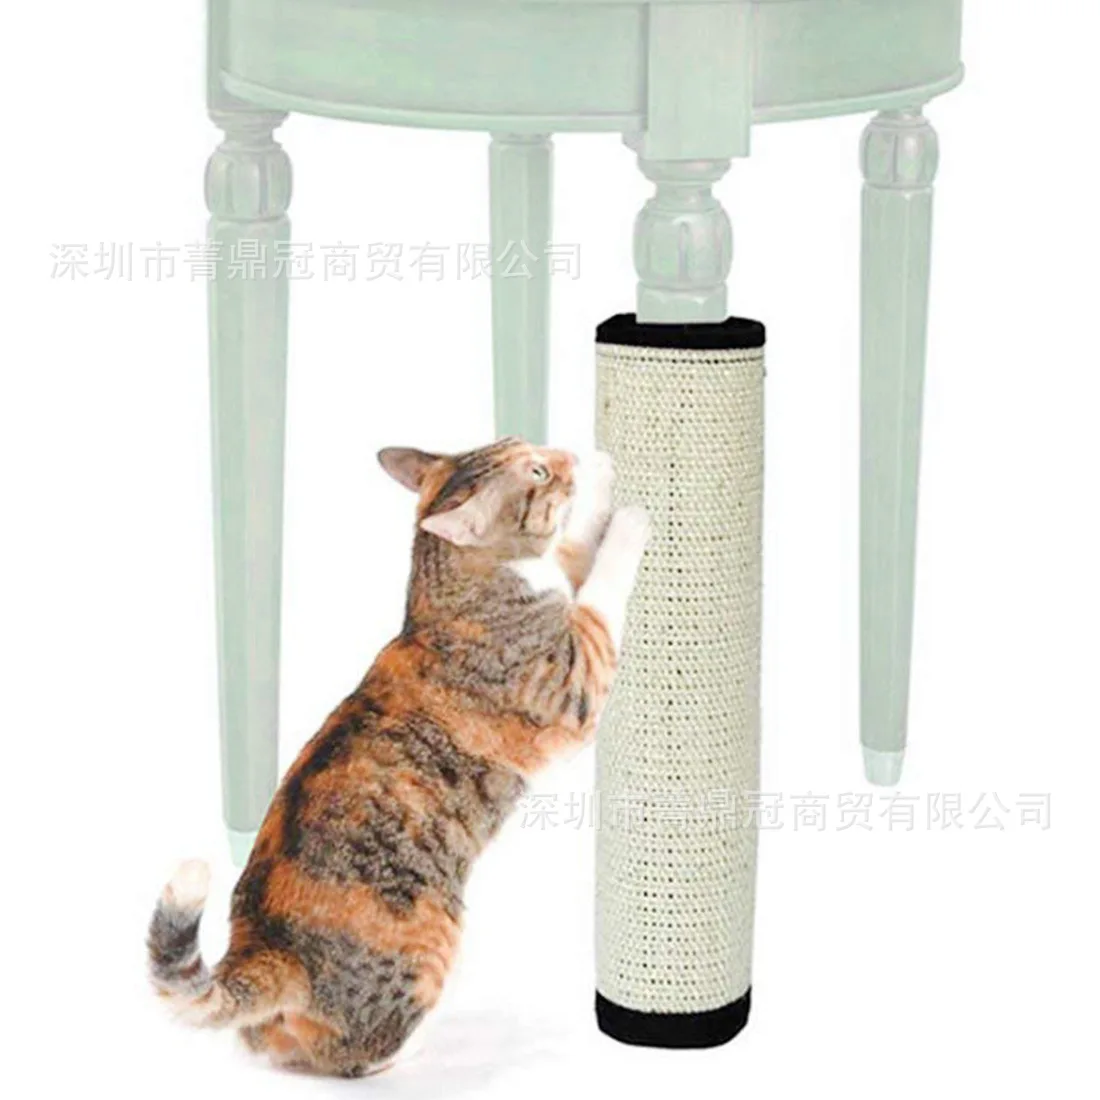 

Cat Scratch Board Toy Sisal Hemp Cat Kitten Scratching Post Pad For Cats Protecting Furniture Grind Claws Cat Scratcher Toy Mat